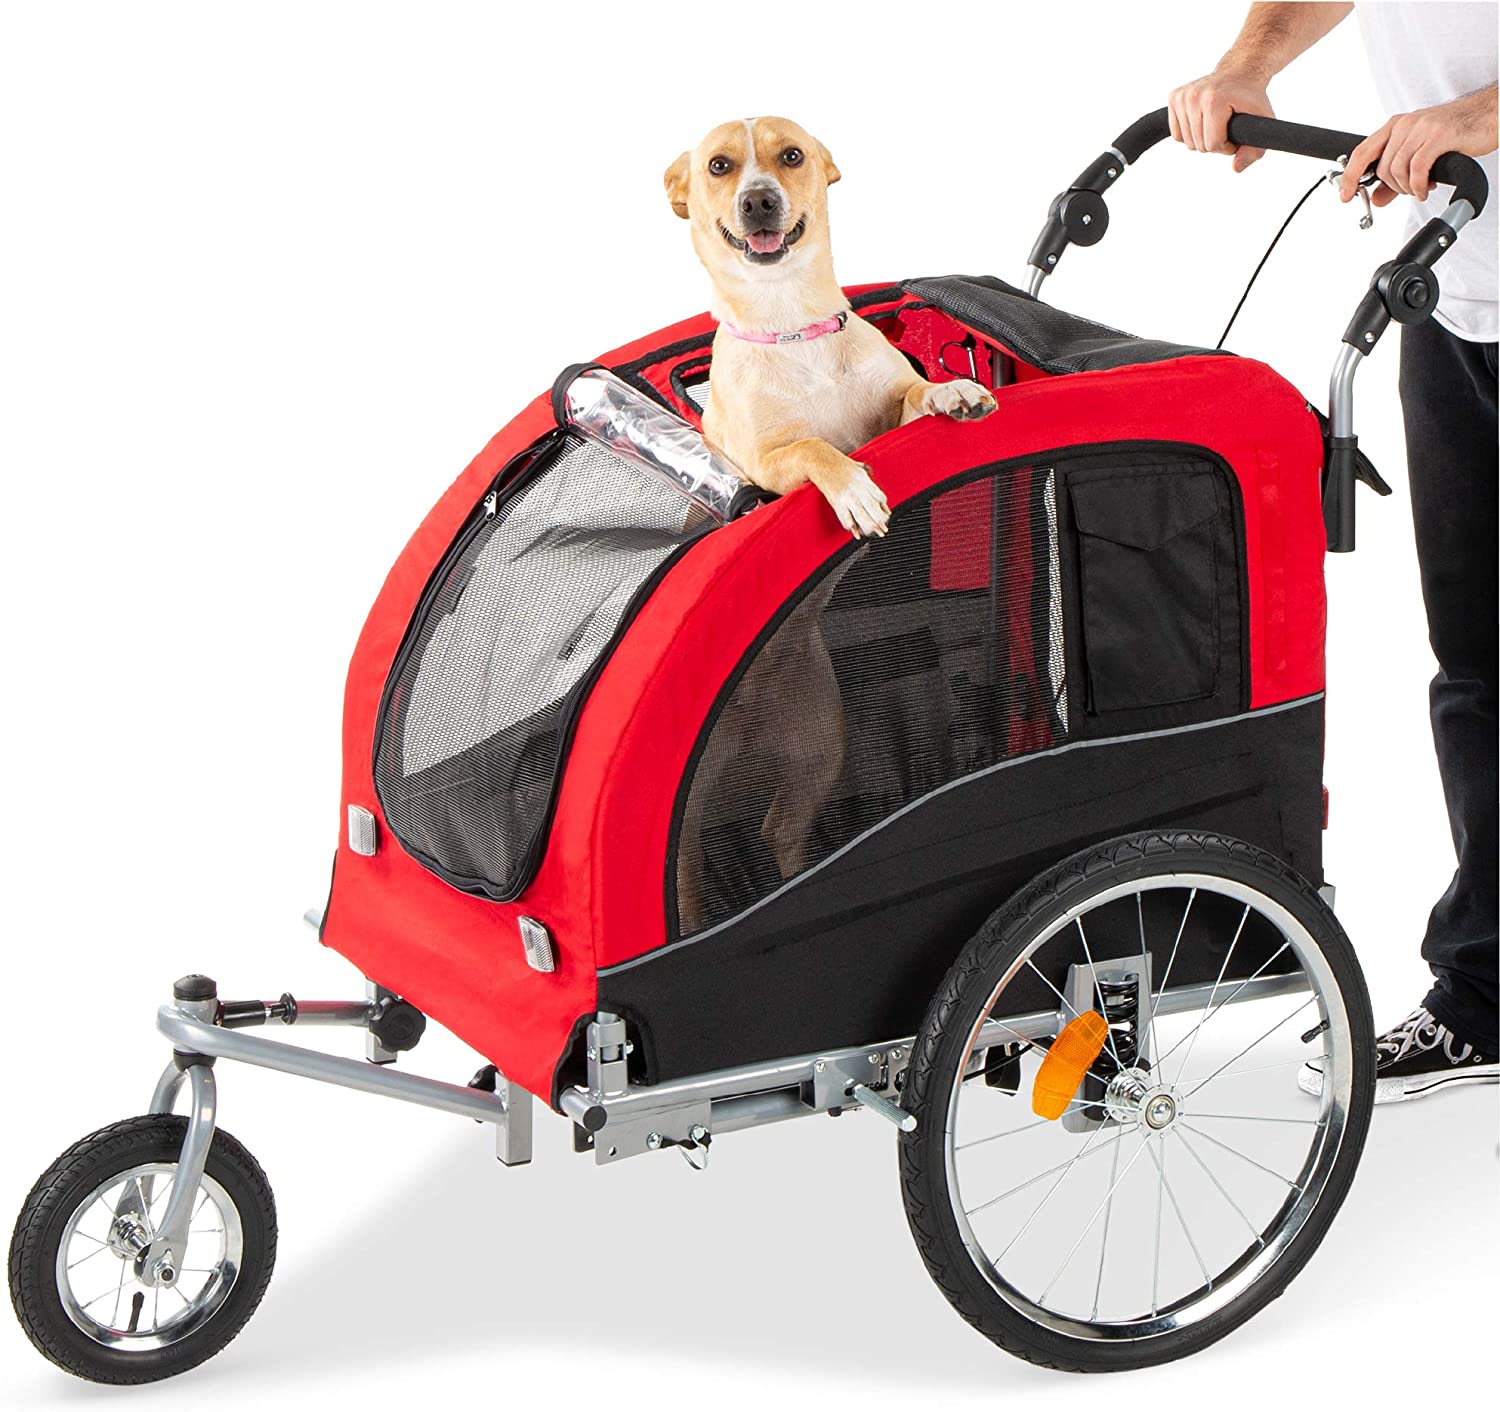 Best Choice Products 2-in-1 Pet Stroller and Trailer